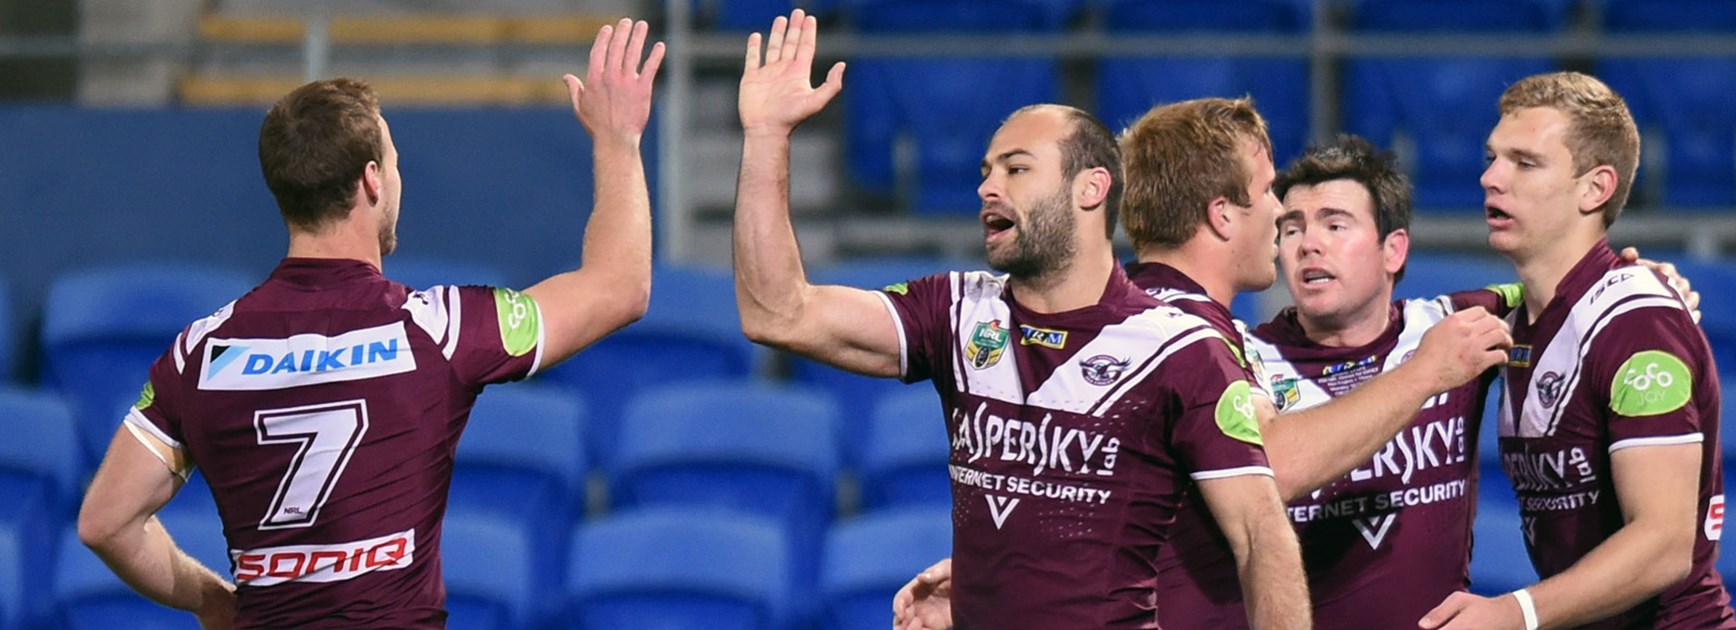 Manly narrowly avoided the finals in 2015, missing out for the first time in over a decade.